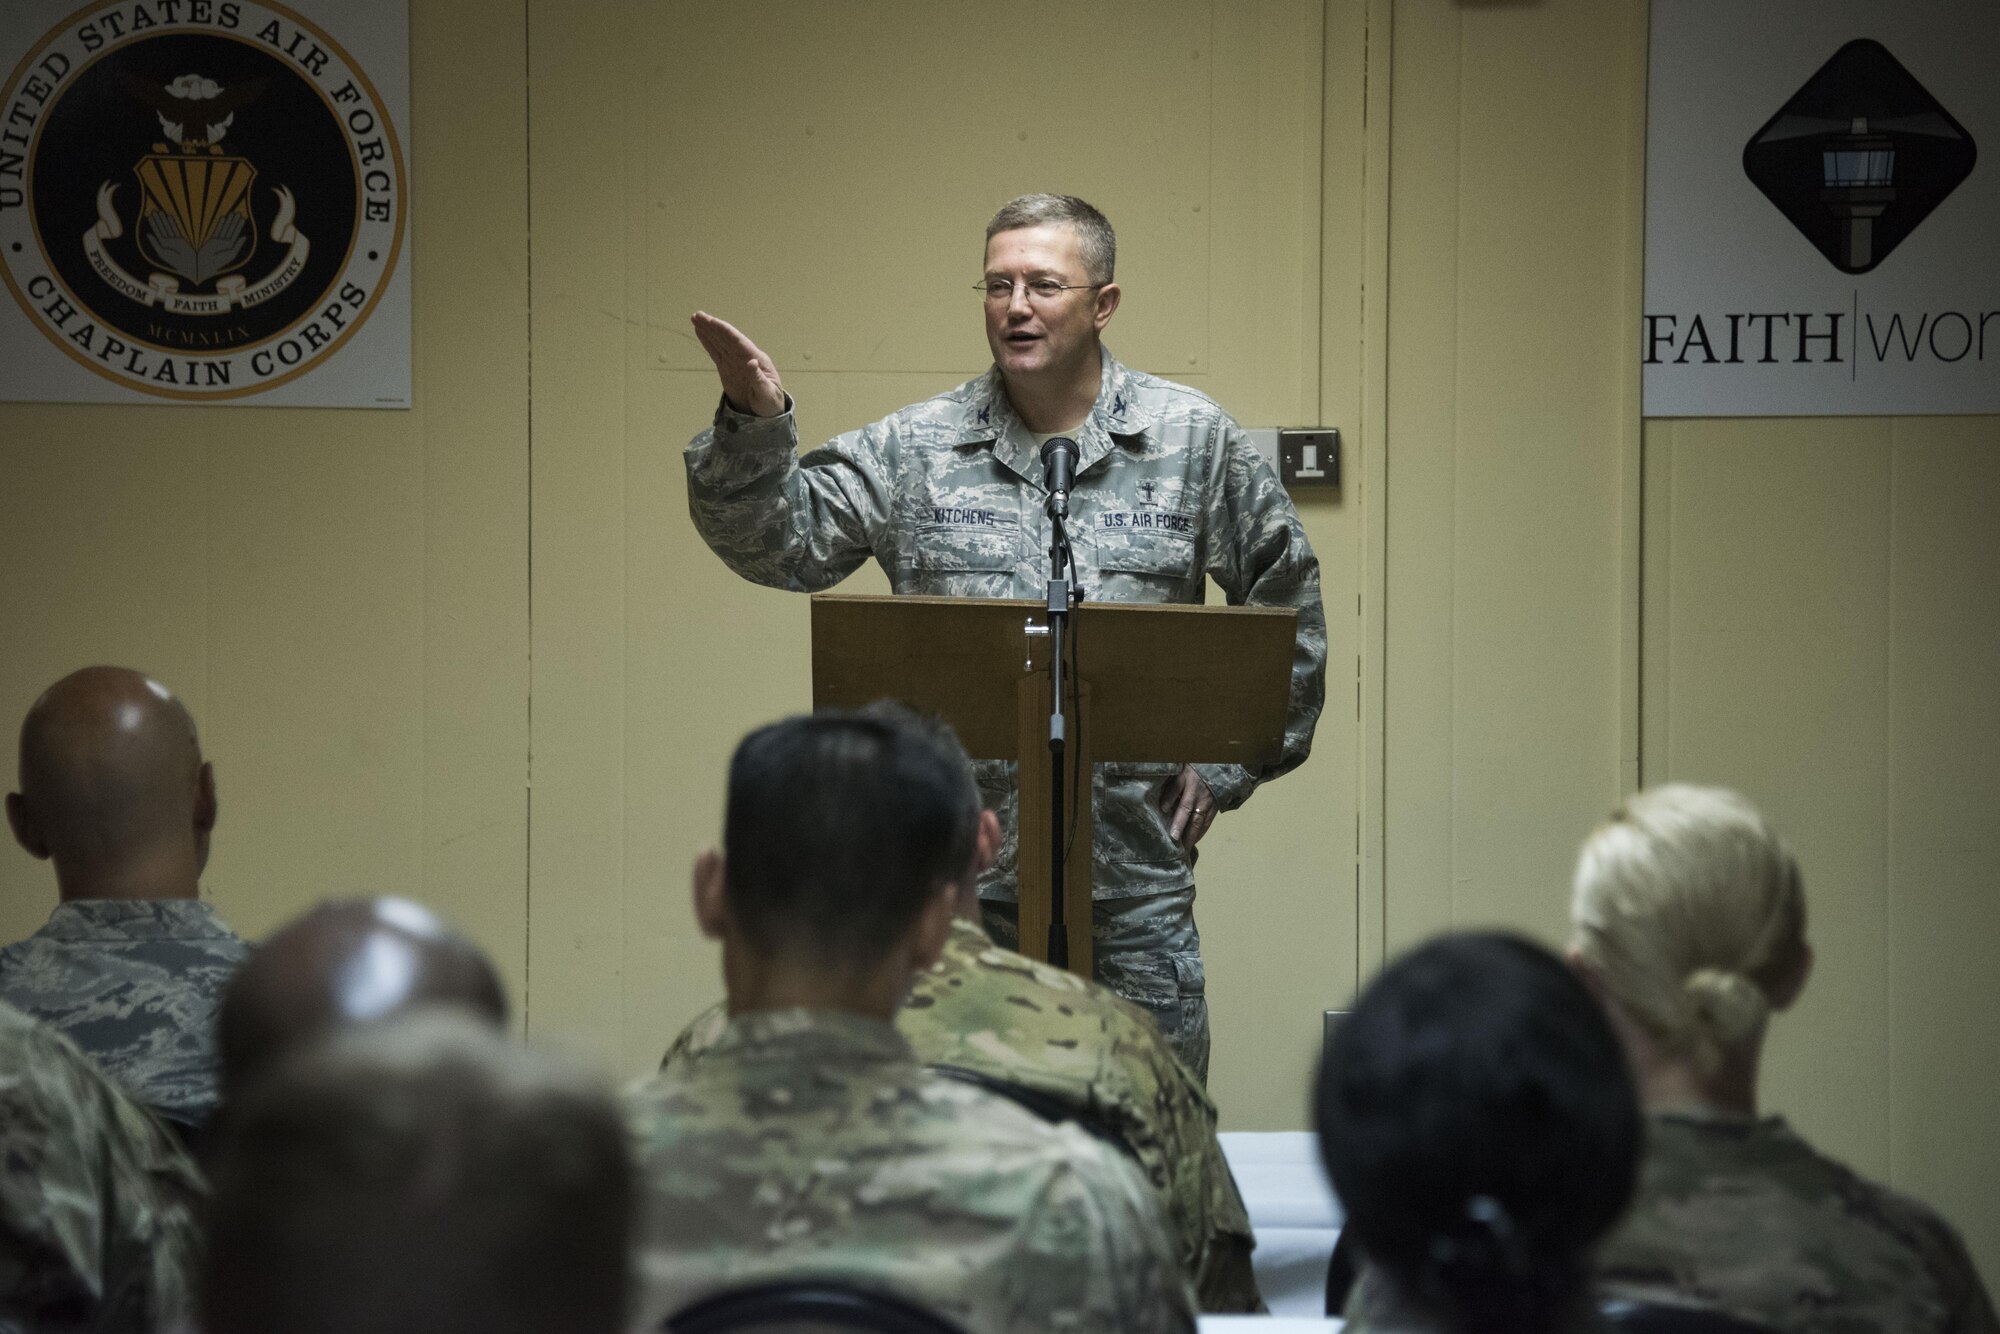 Chaplain Col. Randy Kitchens, AFCENT Command Chaplain, encourage the 386th Air Expeditionary Wing leaders to see faith as a resource during a Faith Works leadership luncheon, at an undisclosed location in Southwest Asia, May 4, 2017. The U.S. Air Force Chaplain Corps recently rolled out the Faith Works campaign to inform Airmen about the overwhelming evidence regarding the positive relationship between spirituality, religion, and health. (U.S. Air Force photo/ Tech. Sgt. Jonathan Hehnly)